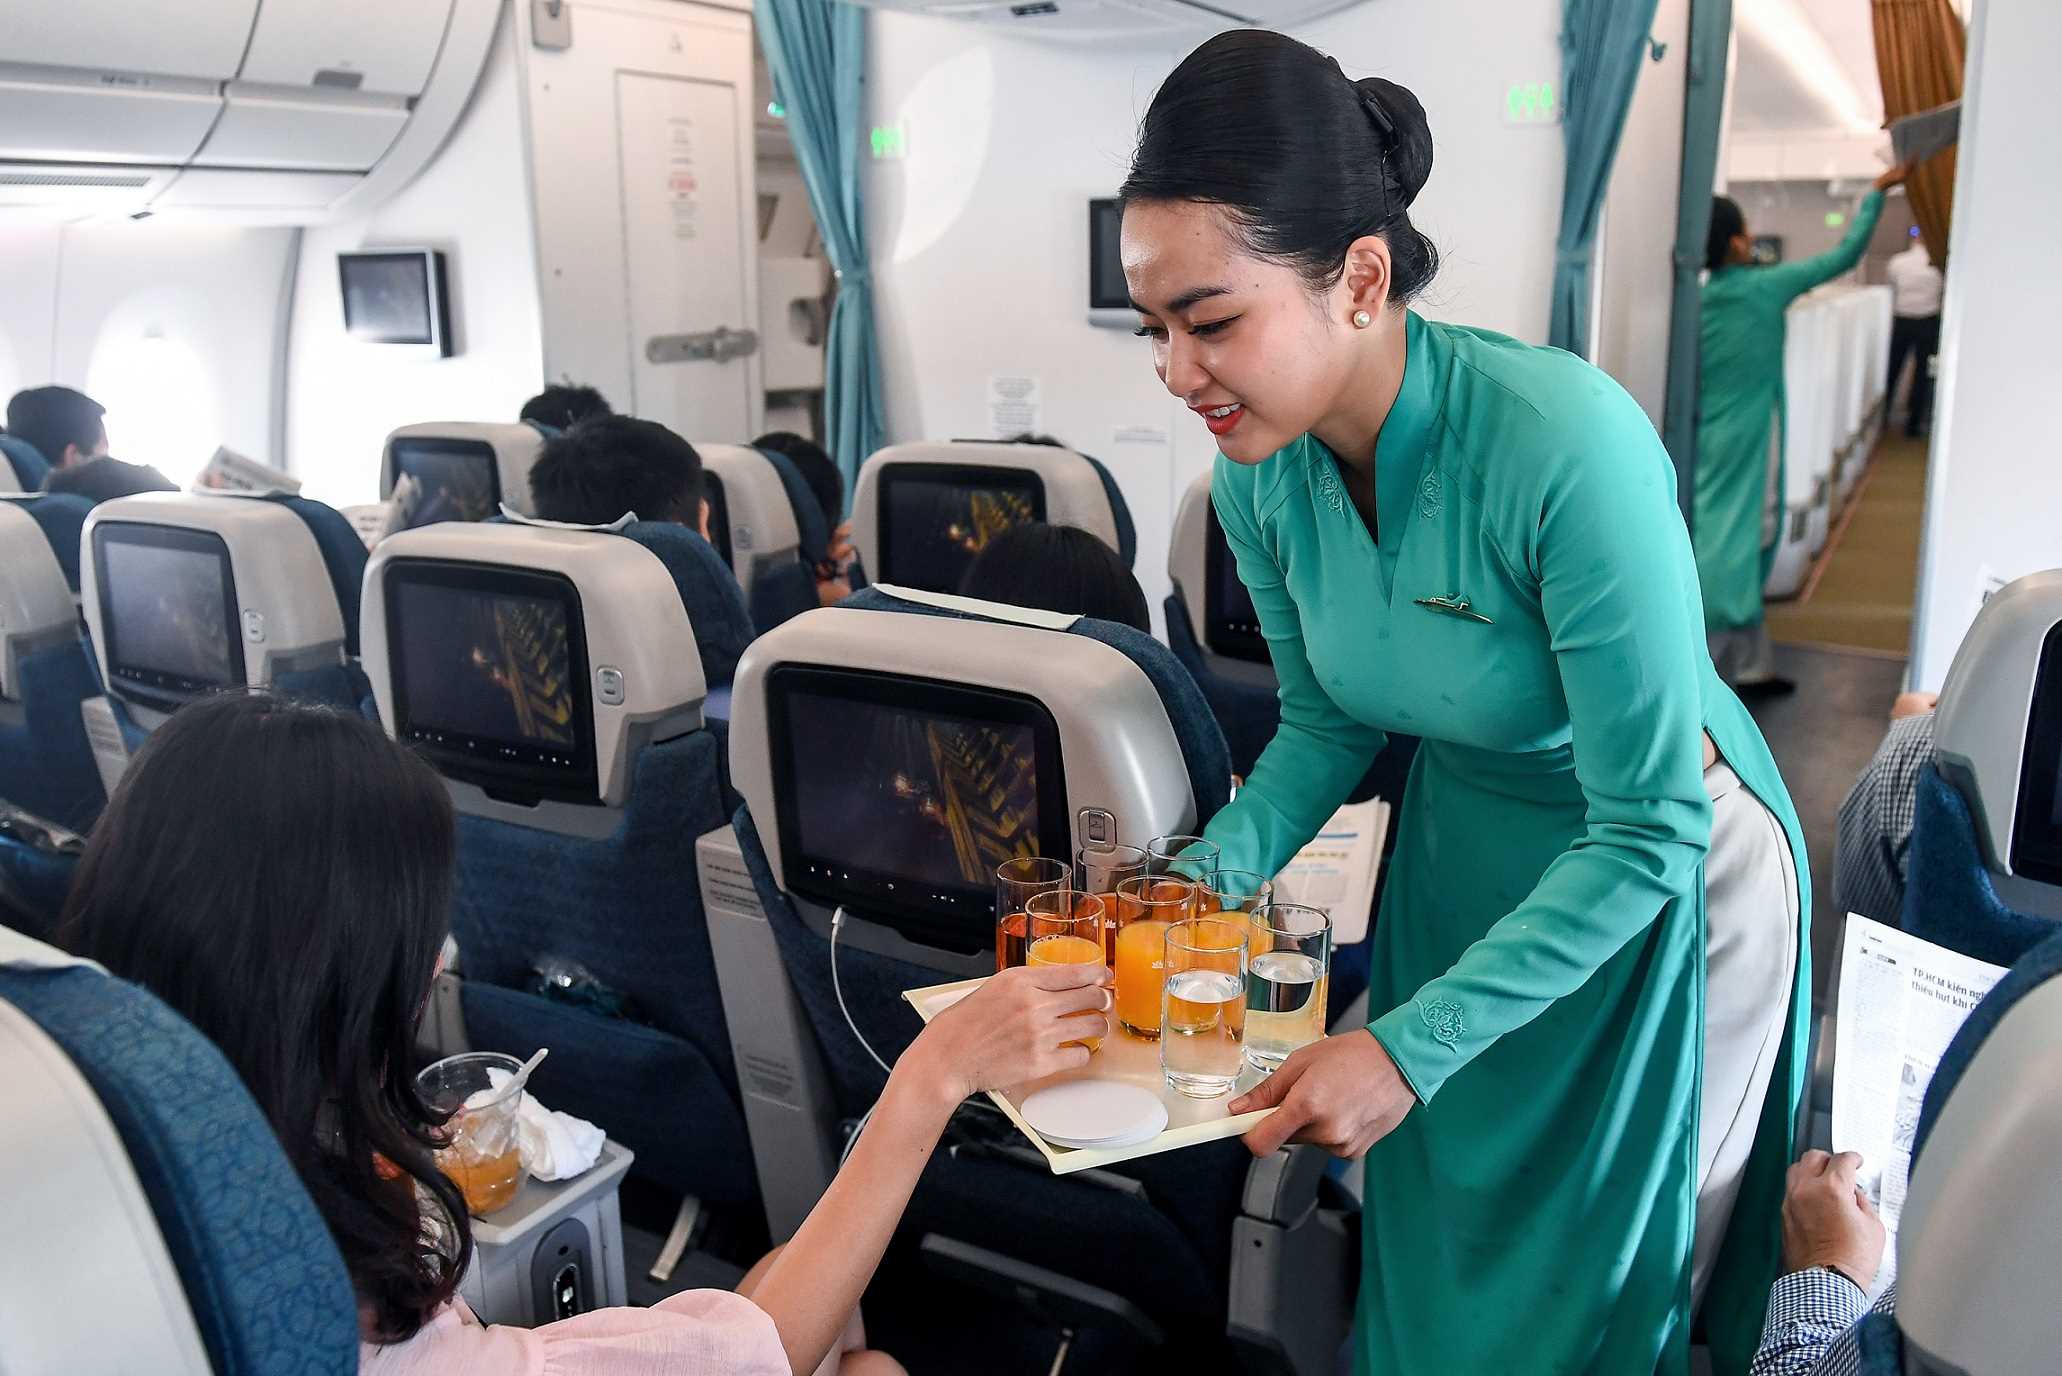 Vietnam Airlines has earned certification by Skytrax Standards, reflecting its commitment to high-quality service and operational excellence